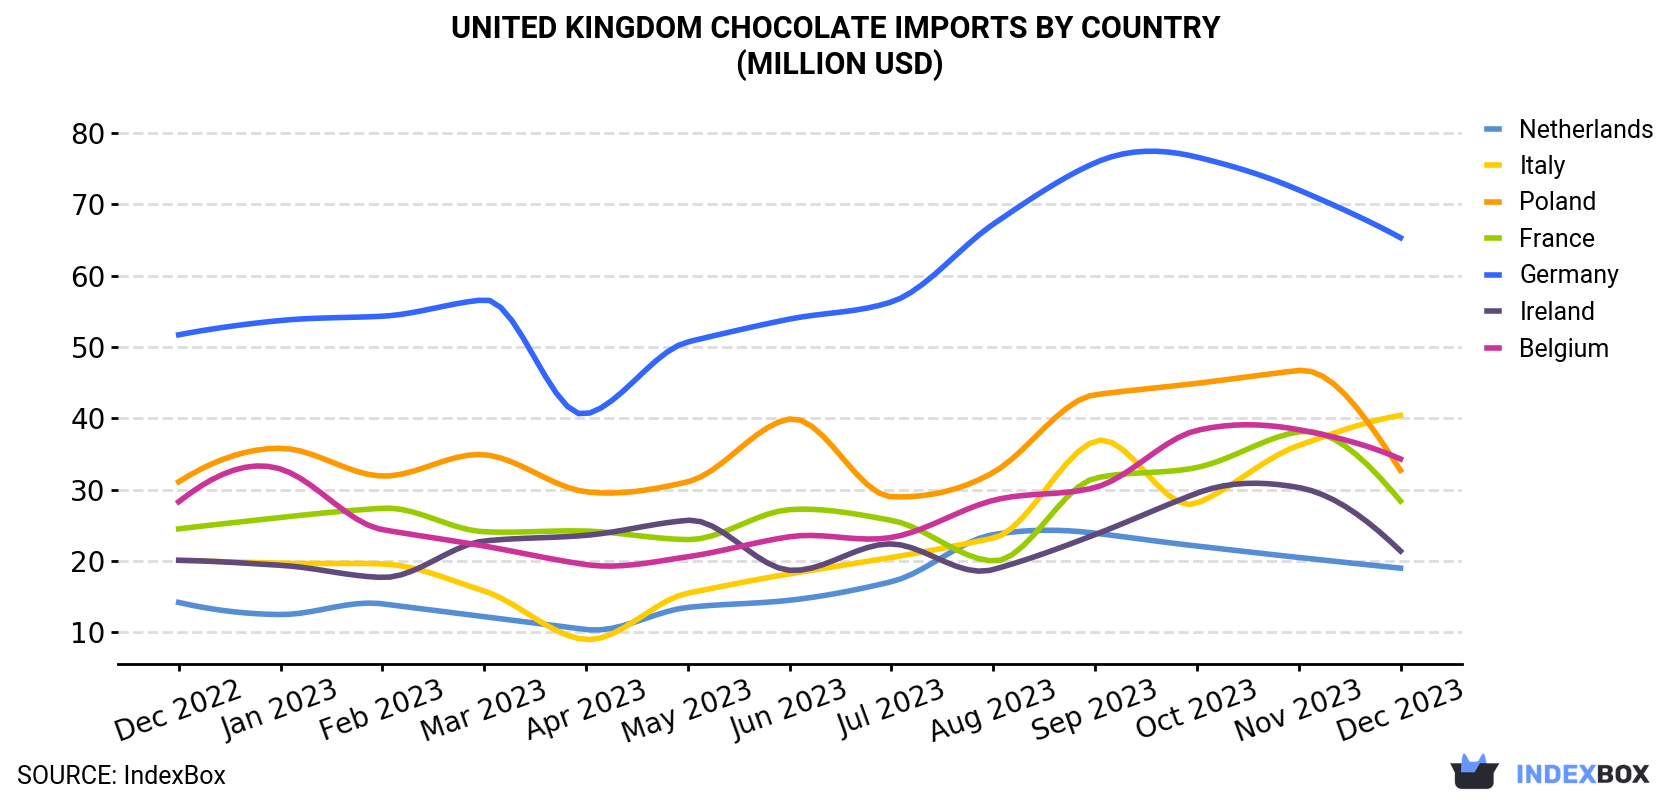 United Kingdom Chocolate Imports By Country (Million USD)